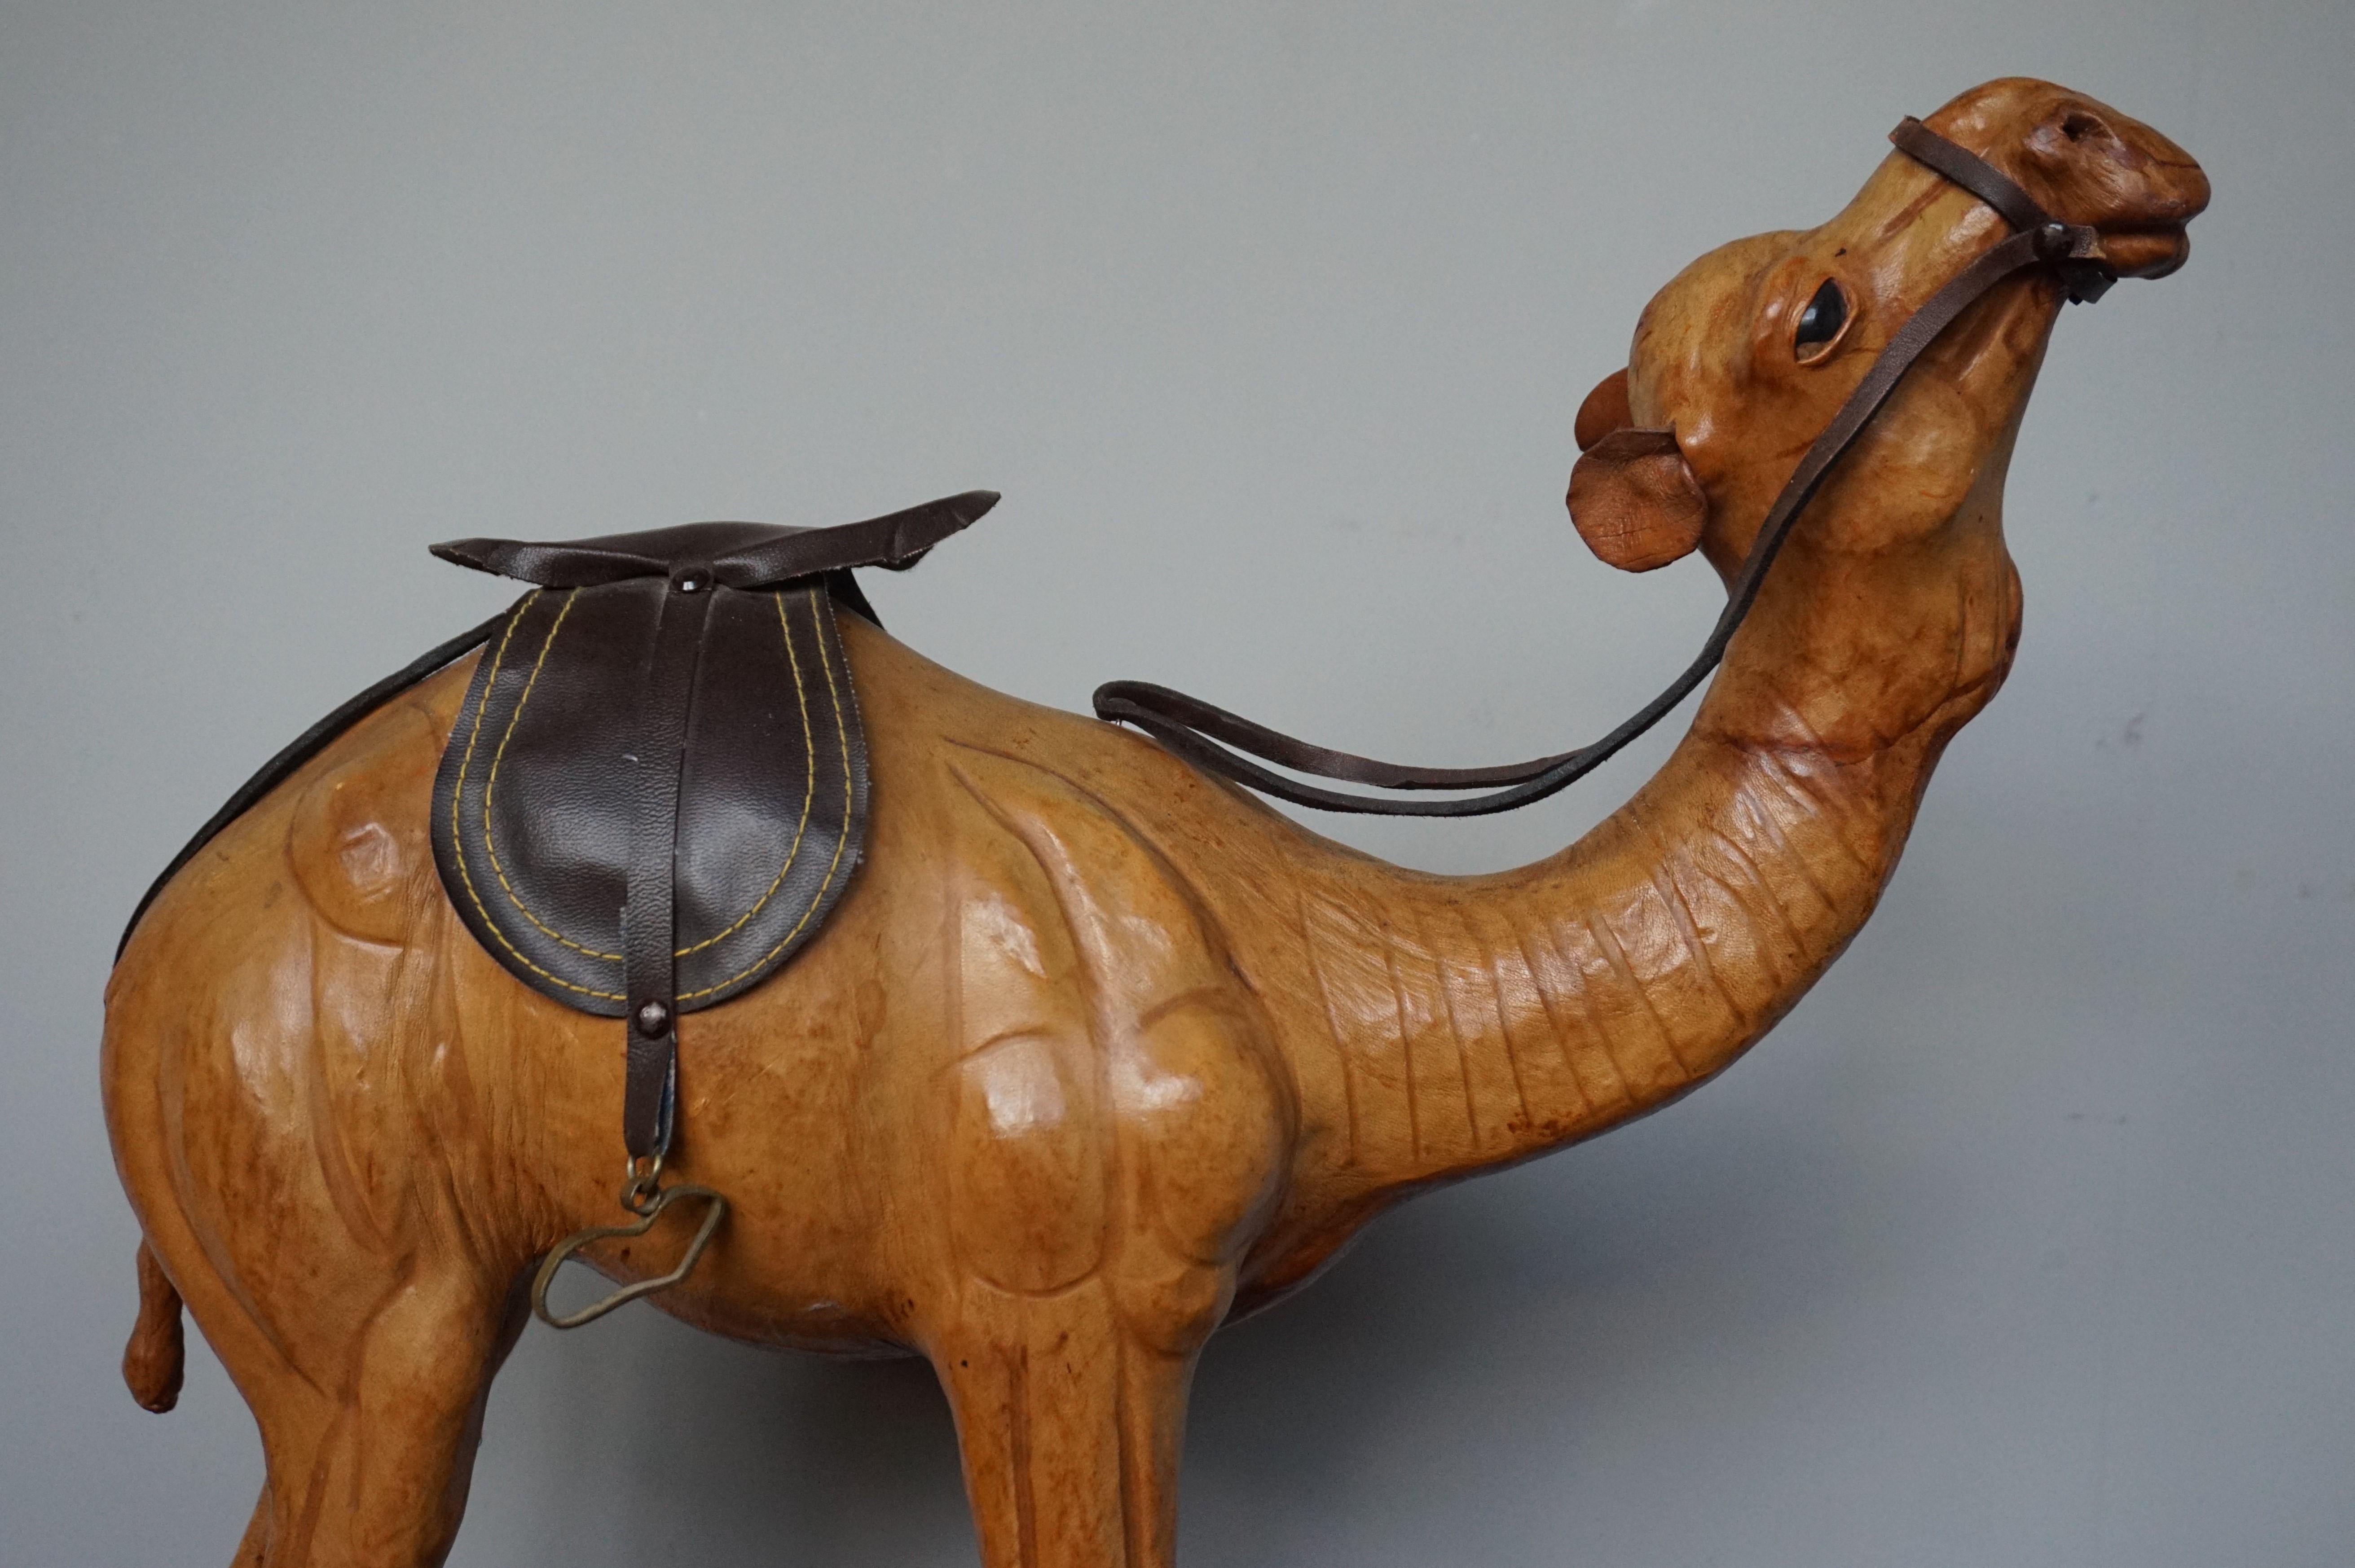 Good size and highly decorative camel or dromedary sculpture, mid-20th century.

This full-grown and very realistic dromedary has both great aesthetic and decorative value. Underneath the leather hide is a very well carved wooden sculpture which is